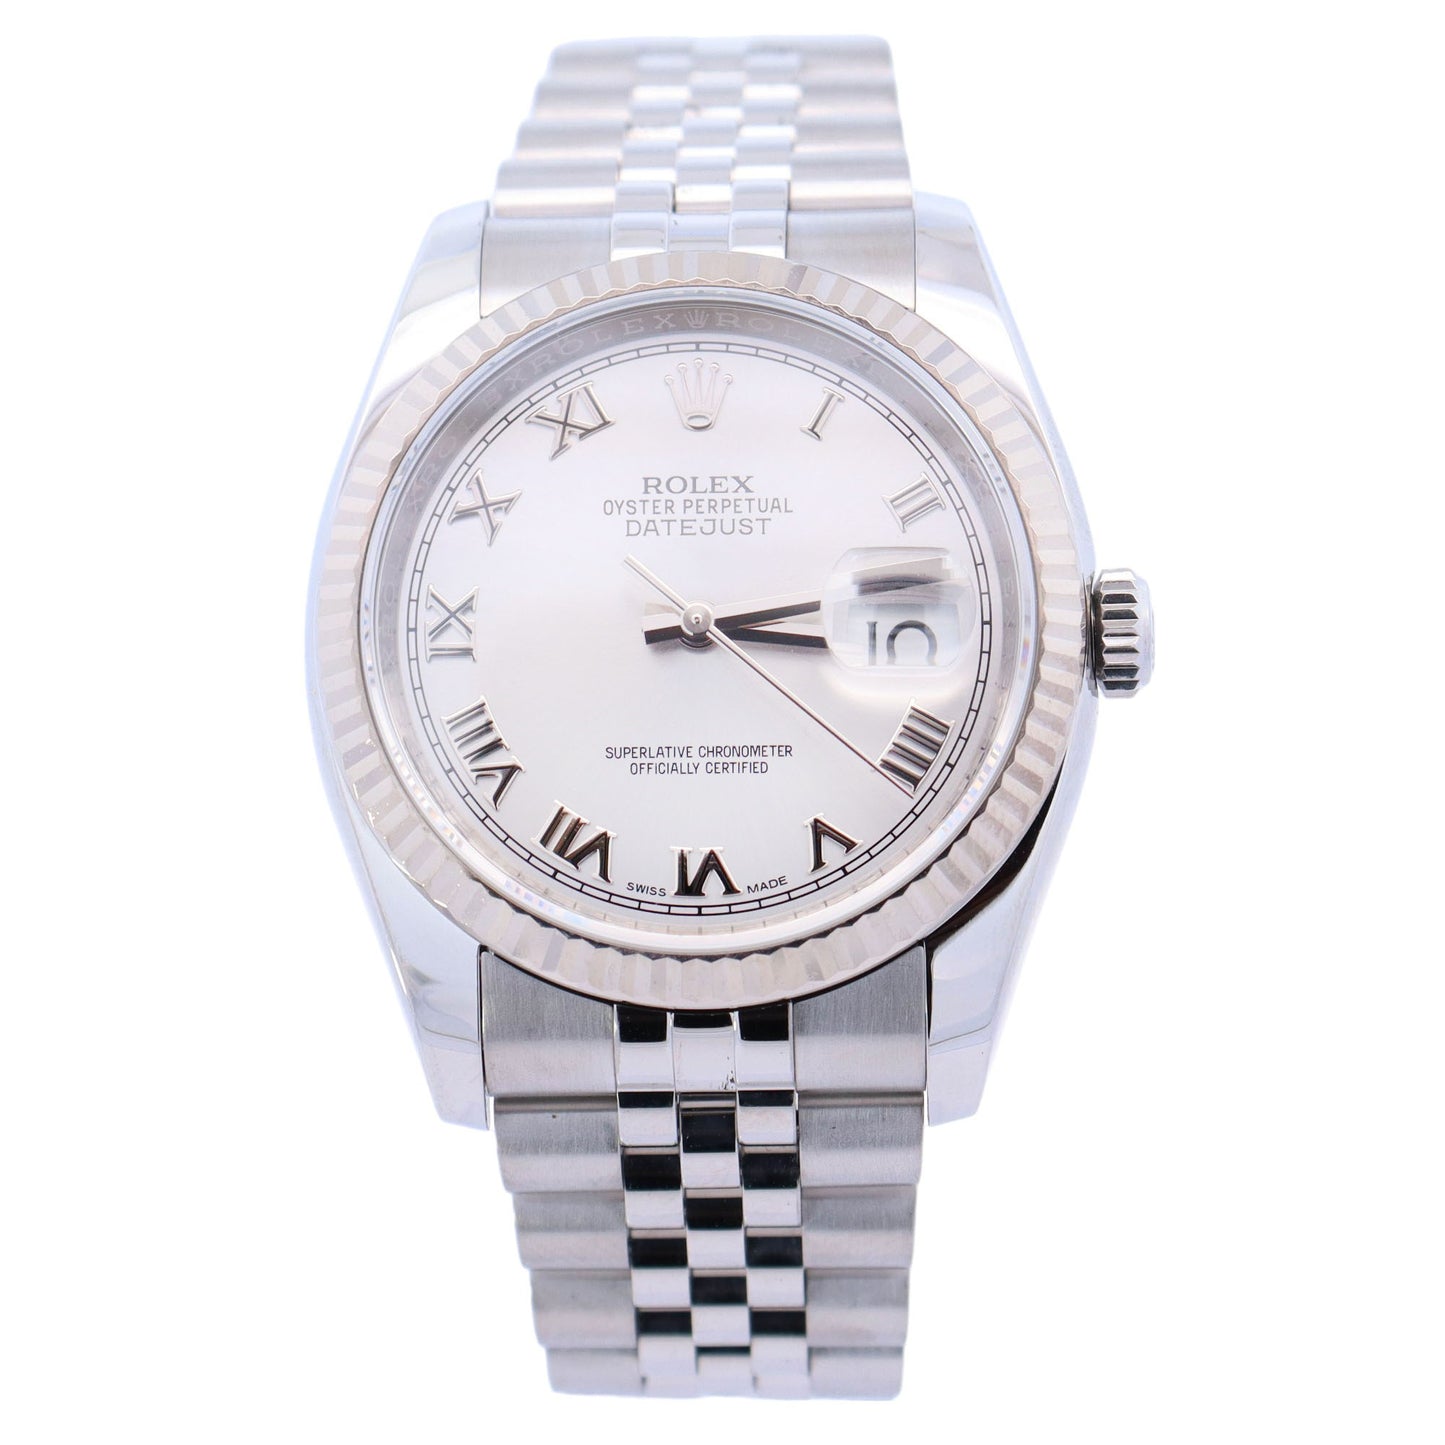 Rolex Datejust 36mm Stainless Steel Silver Roman Dial Watch Reference# 16234